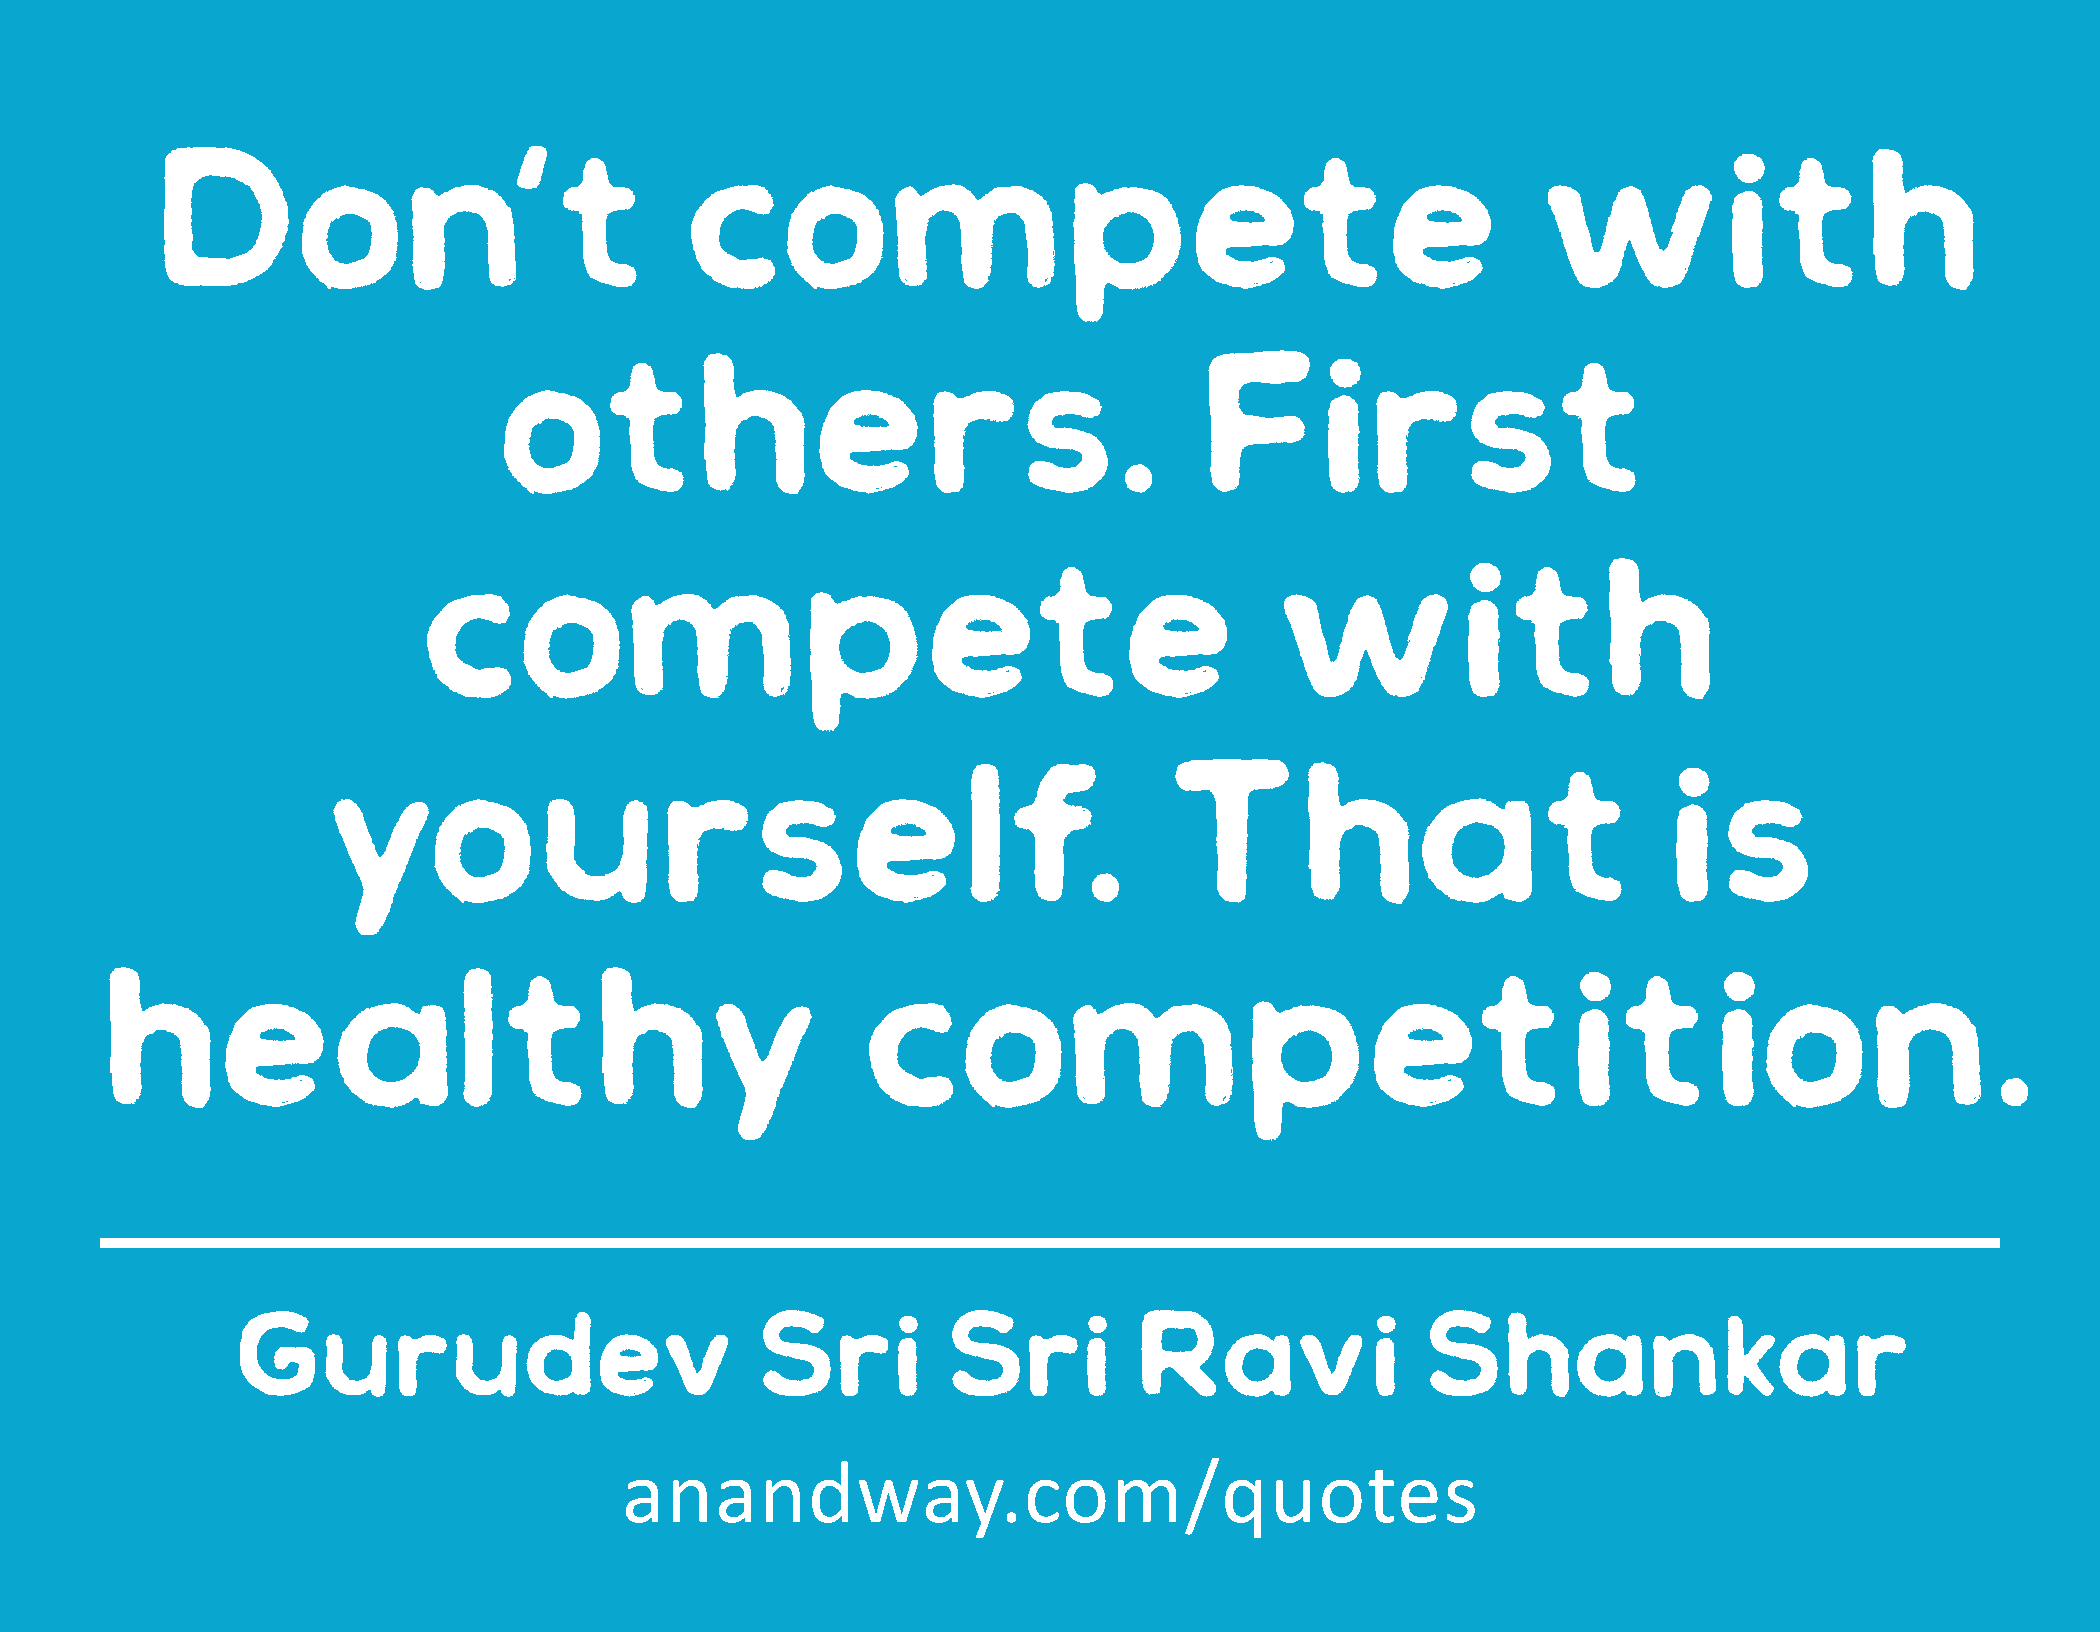 Don't compete with others. First compete with yourself. That is healthy competition. 
 -Gurudev Sri Sri Ravi Shankar